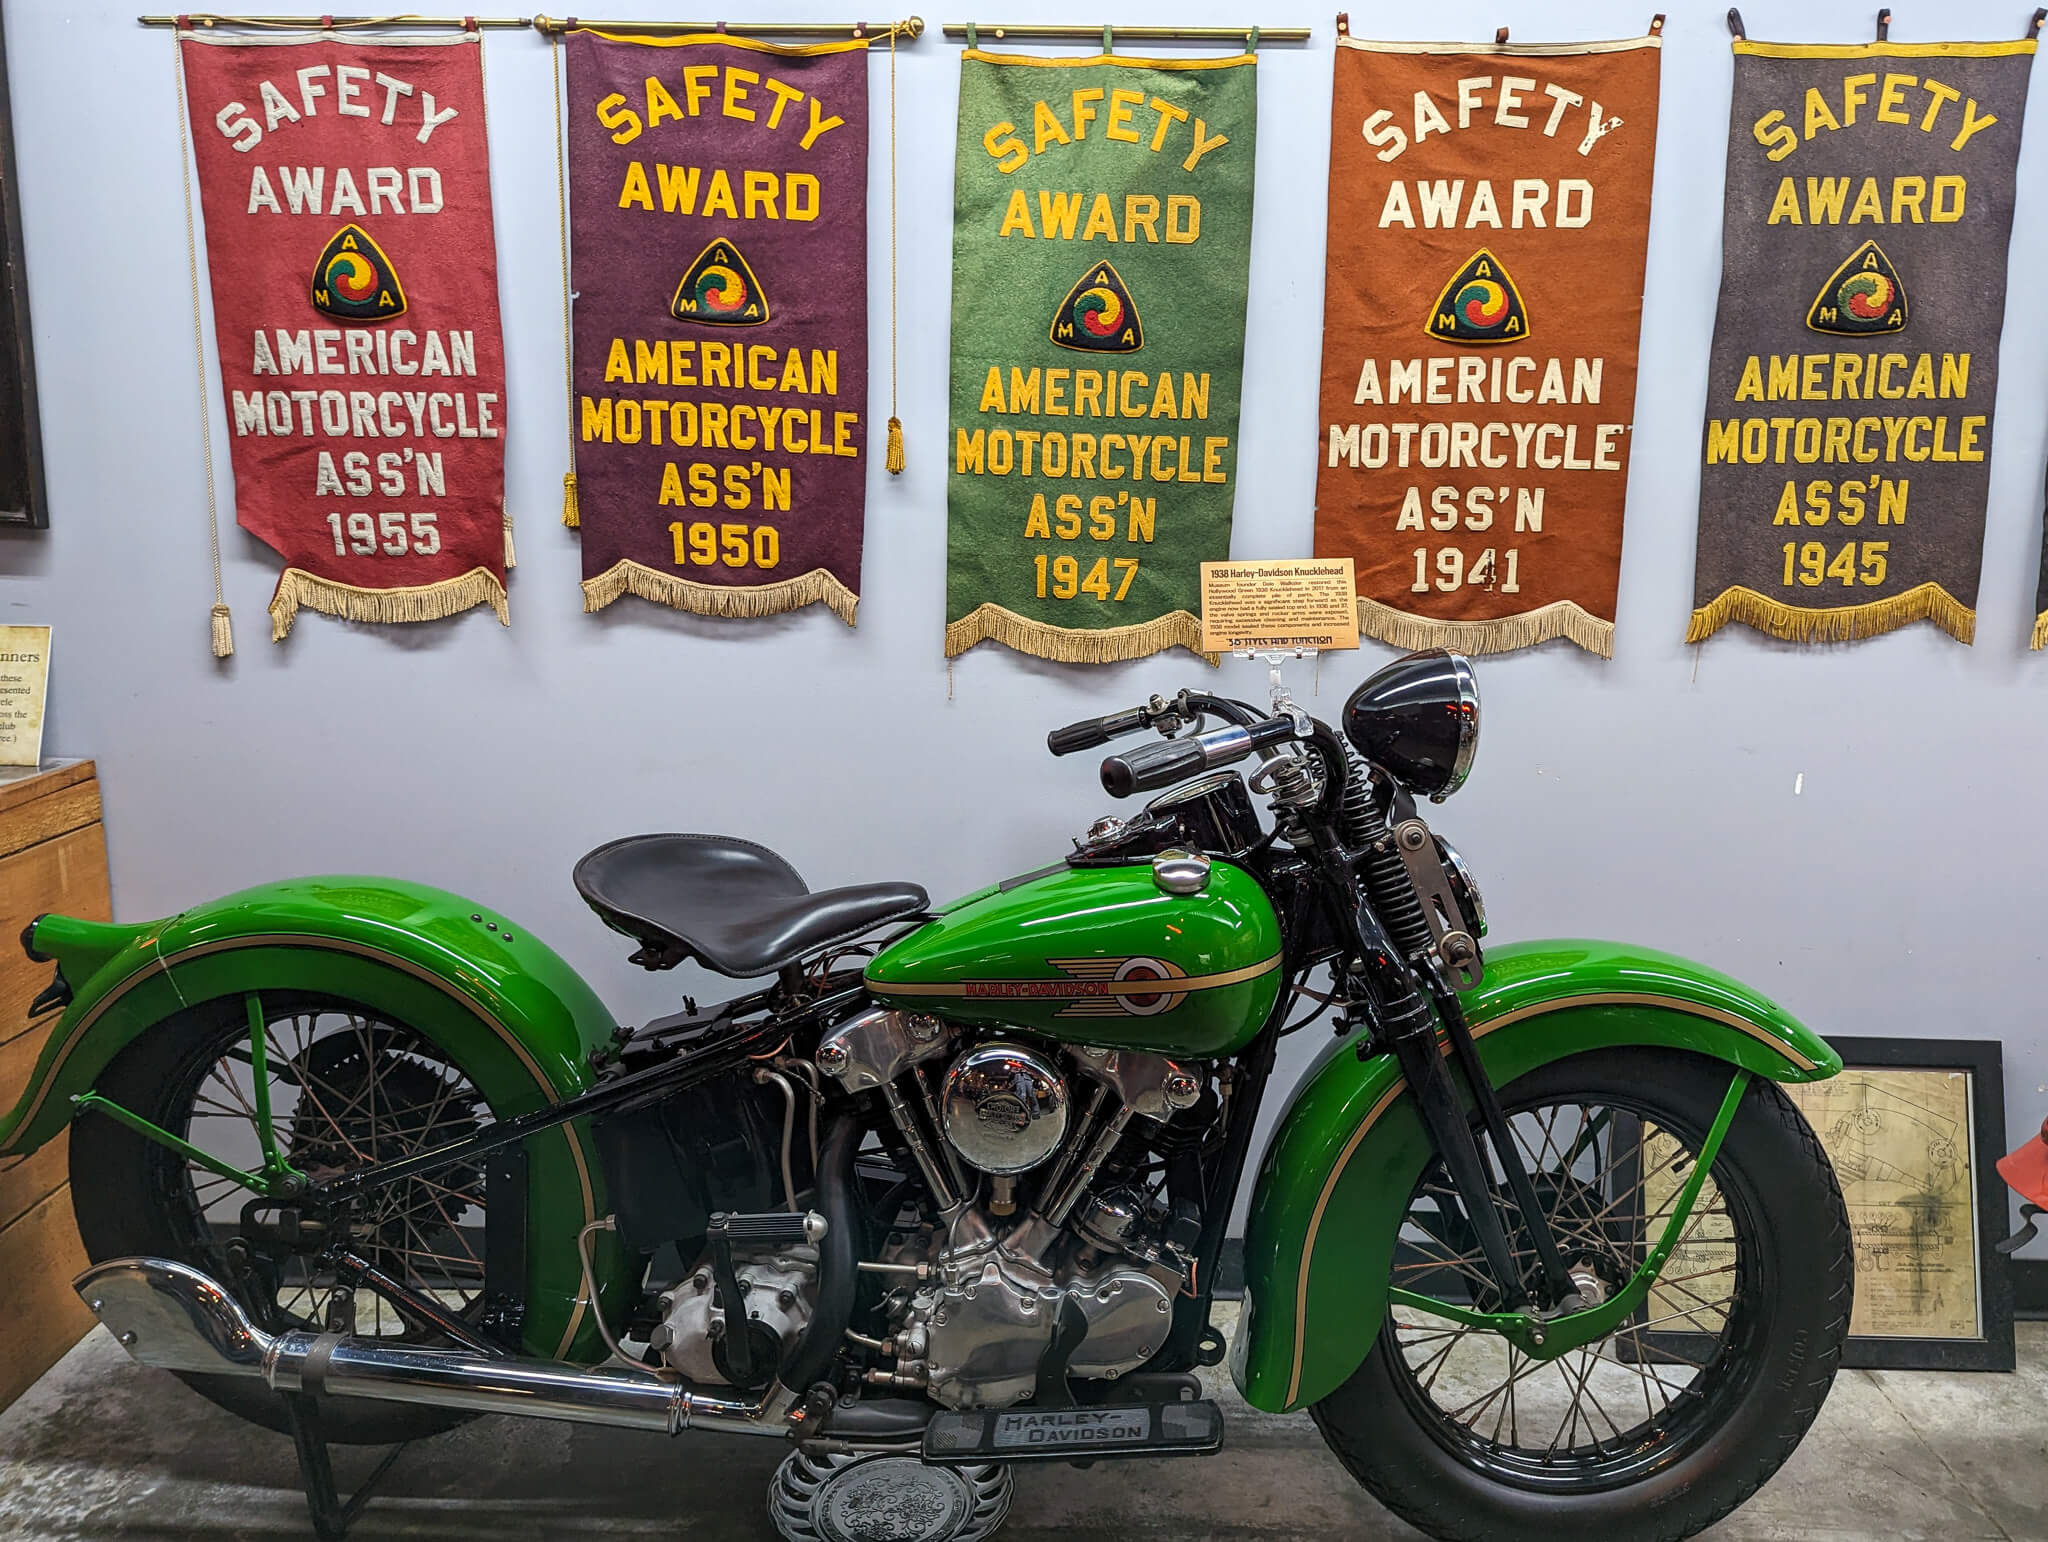 Vibrant green antique Harley motorcycle in front of vintage AMA Safety Awards